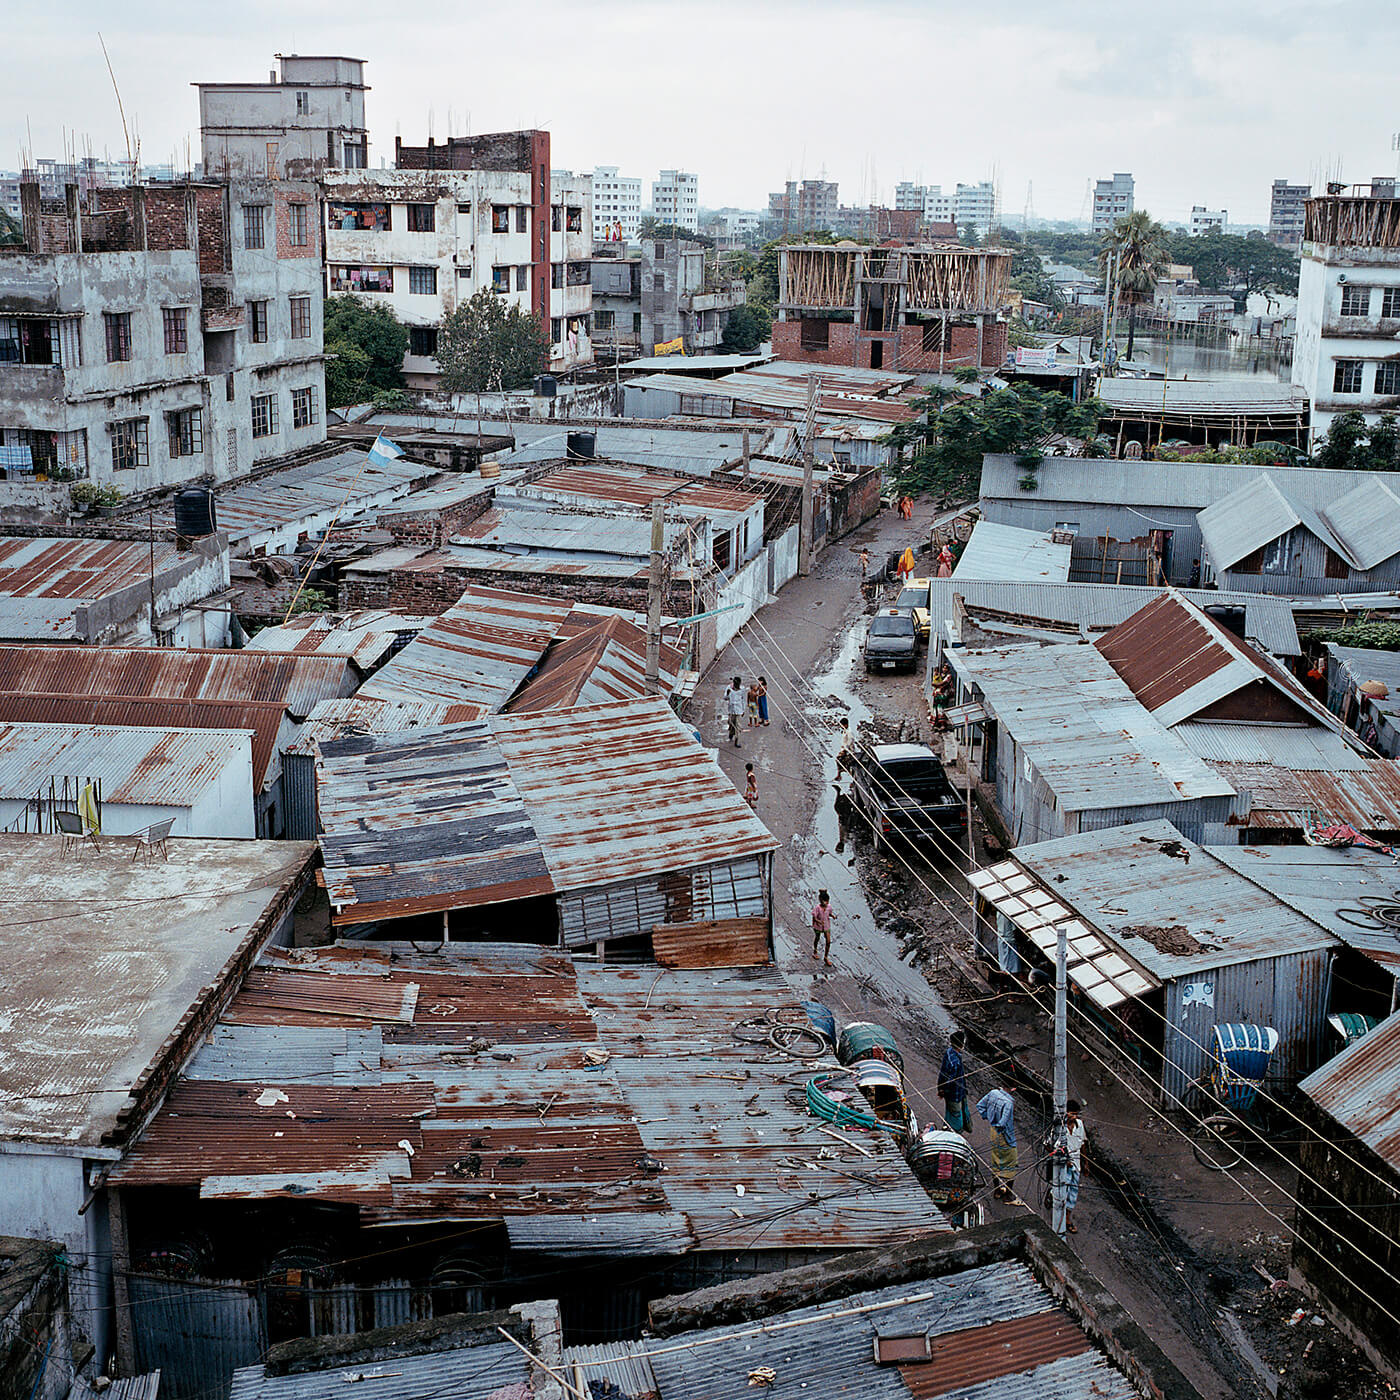 Rooftops from the crowded city of Dhaka